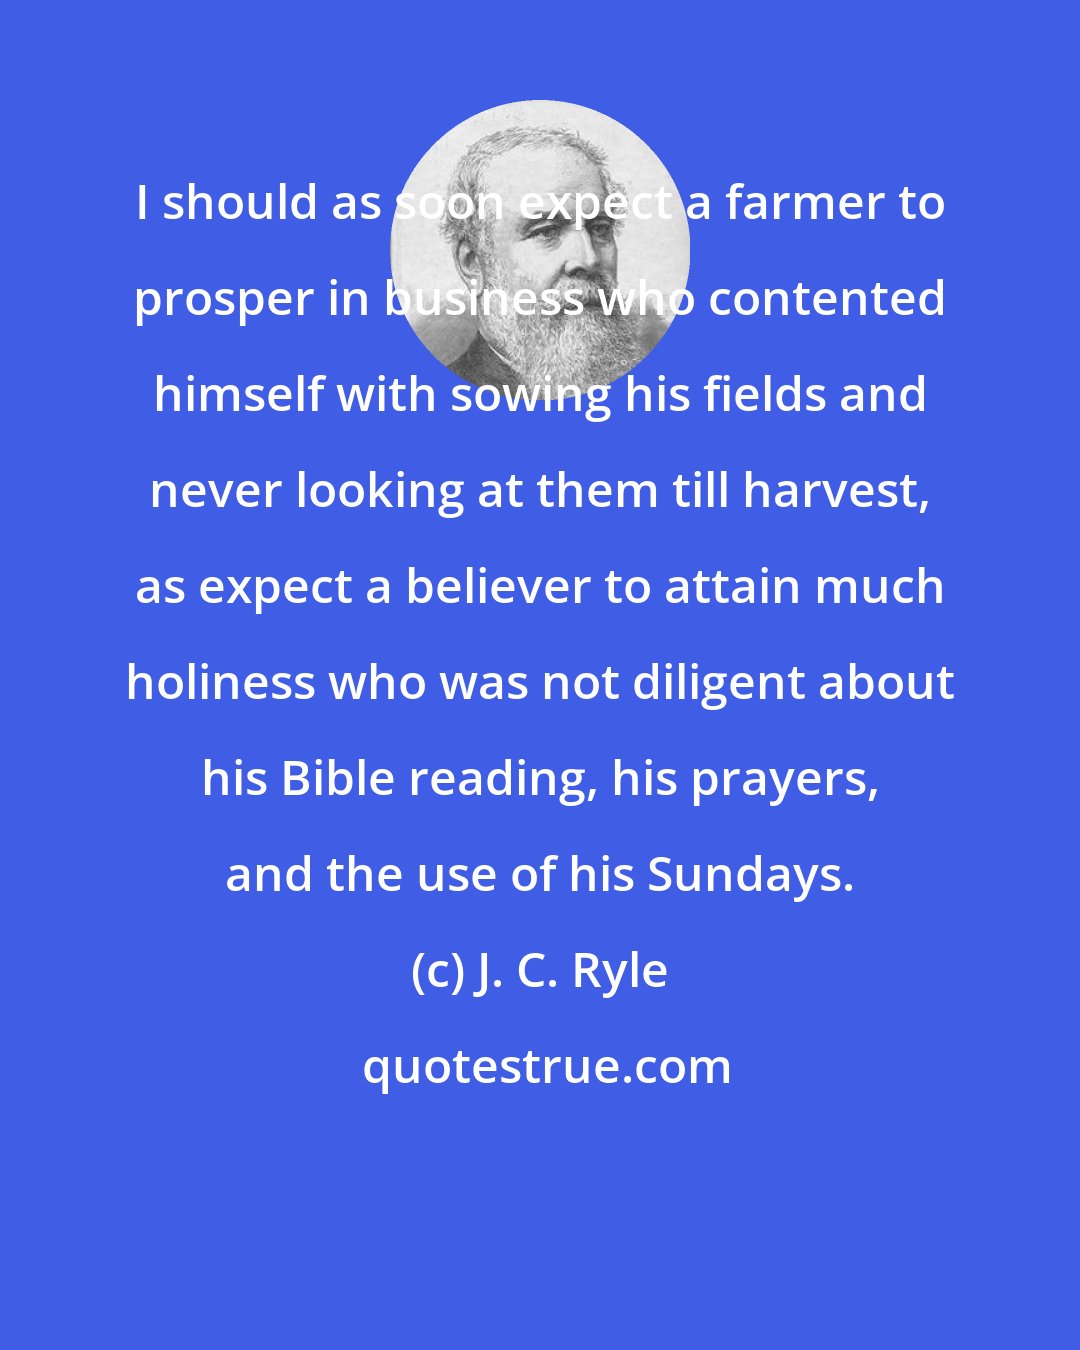 J. C. Ryle: I should as soon expect a farmer to prosper in business who contented himself with sowing his fields and never looking at them till harvest, as expect a believer to attain much holiness who was not diligent about his Bible reading, his prayers, and the use of his Sundays.